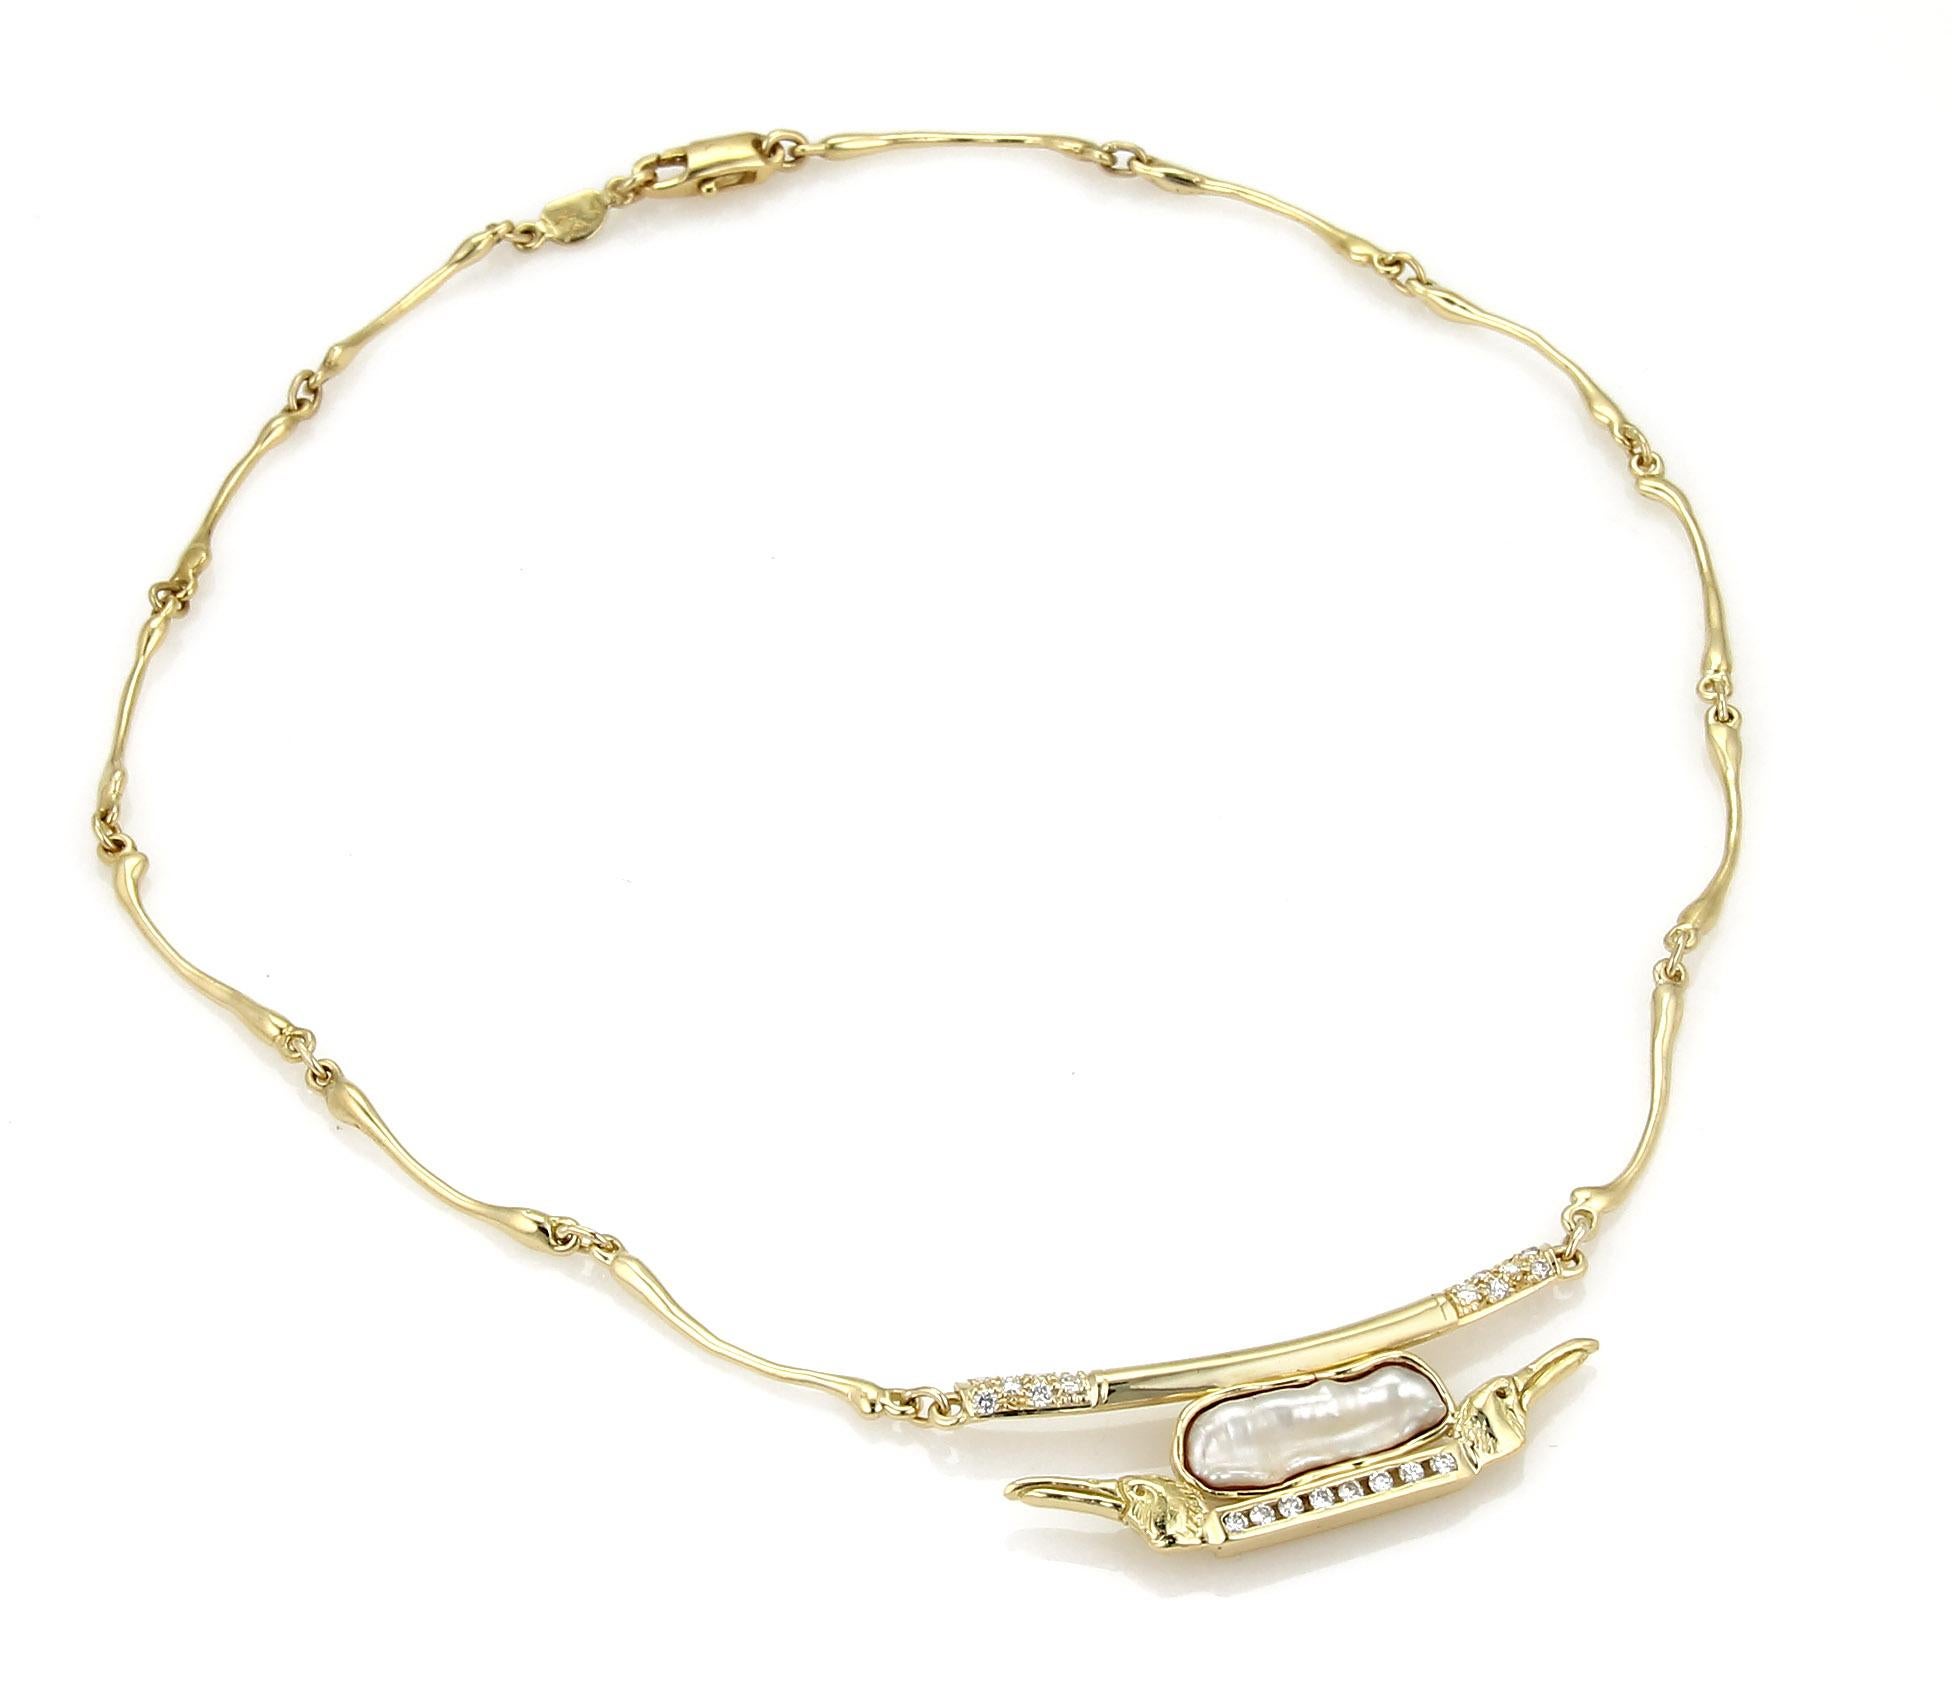 This is a lovely designer Anthony Kim necklace is crafted from solid 18k yellow gold with a polished finish. The pendant features a long curved bar with diamonds on each end, just above the bar is a long freshwater pearl in a basin like gold frame